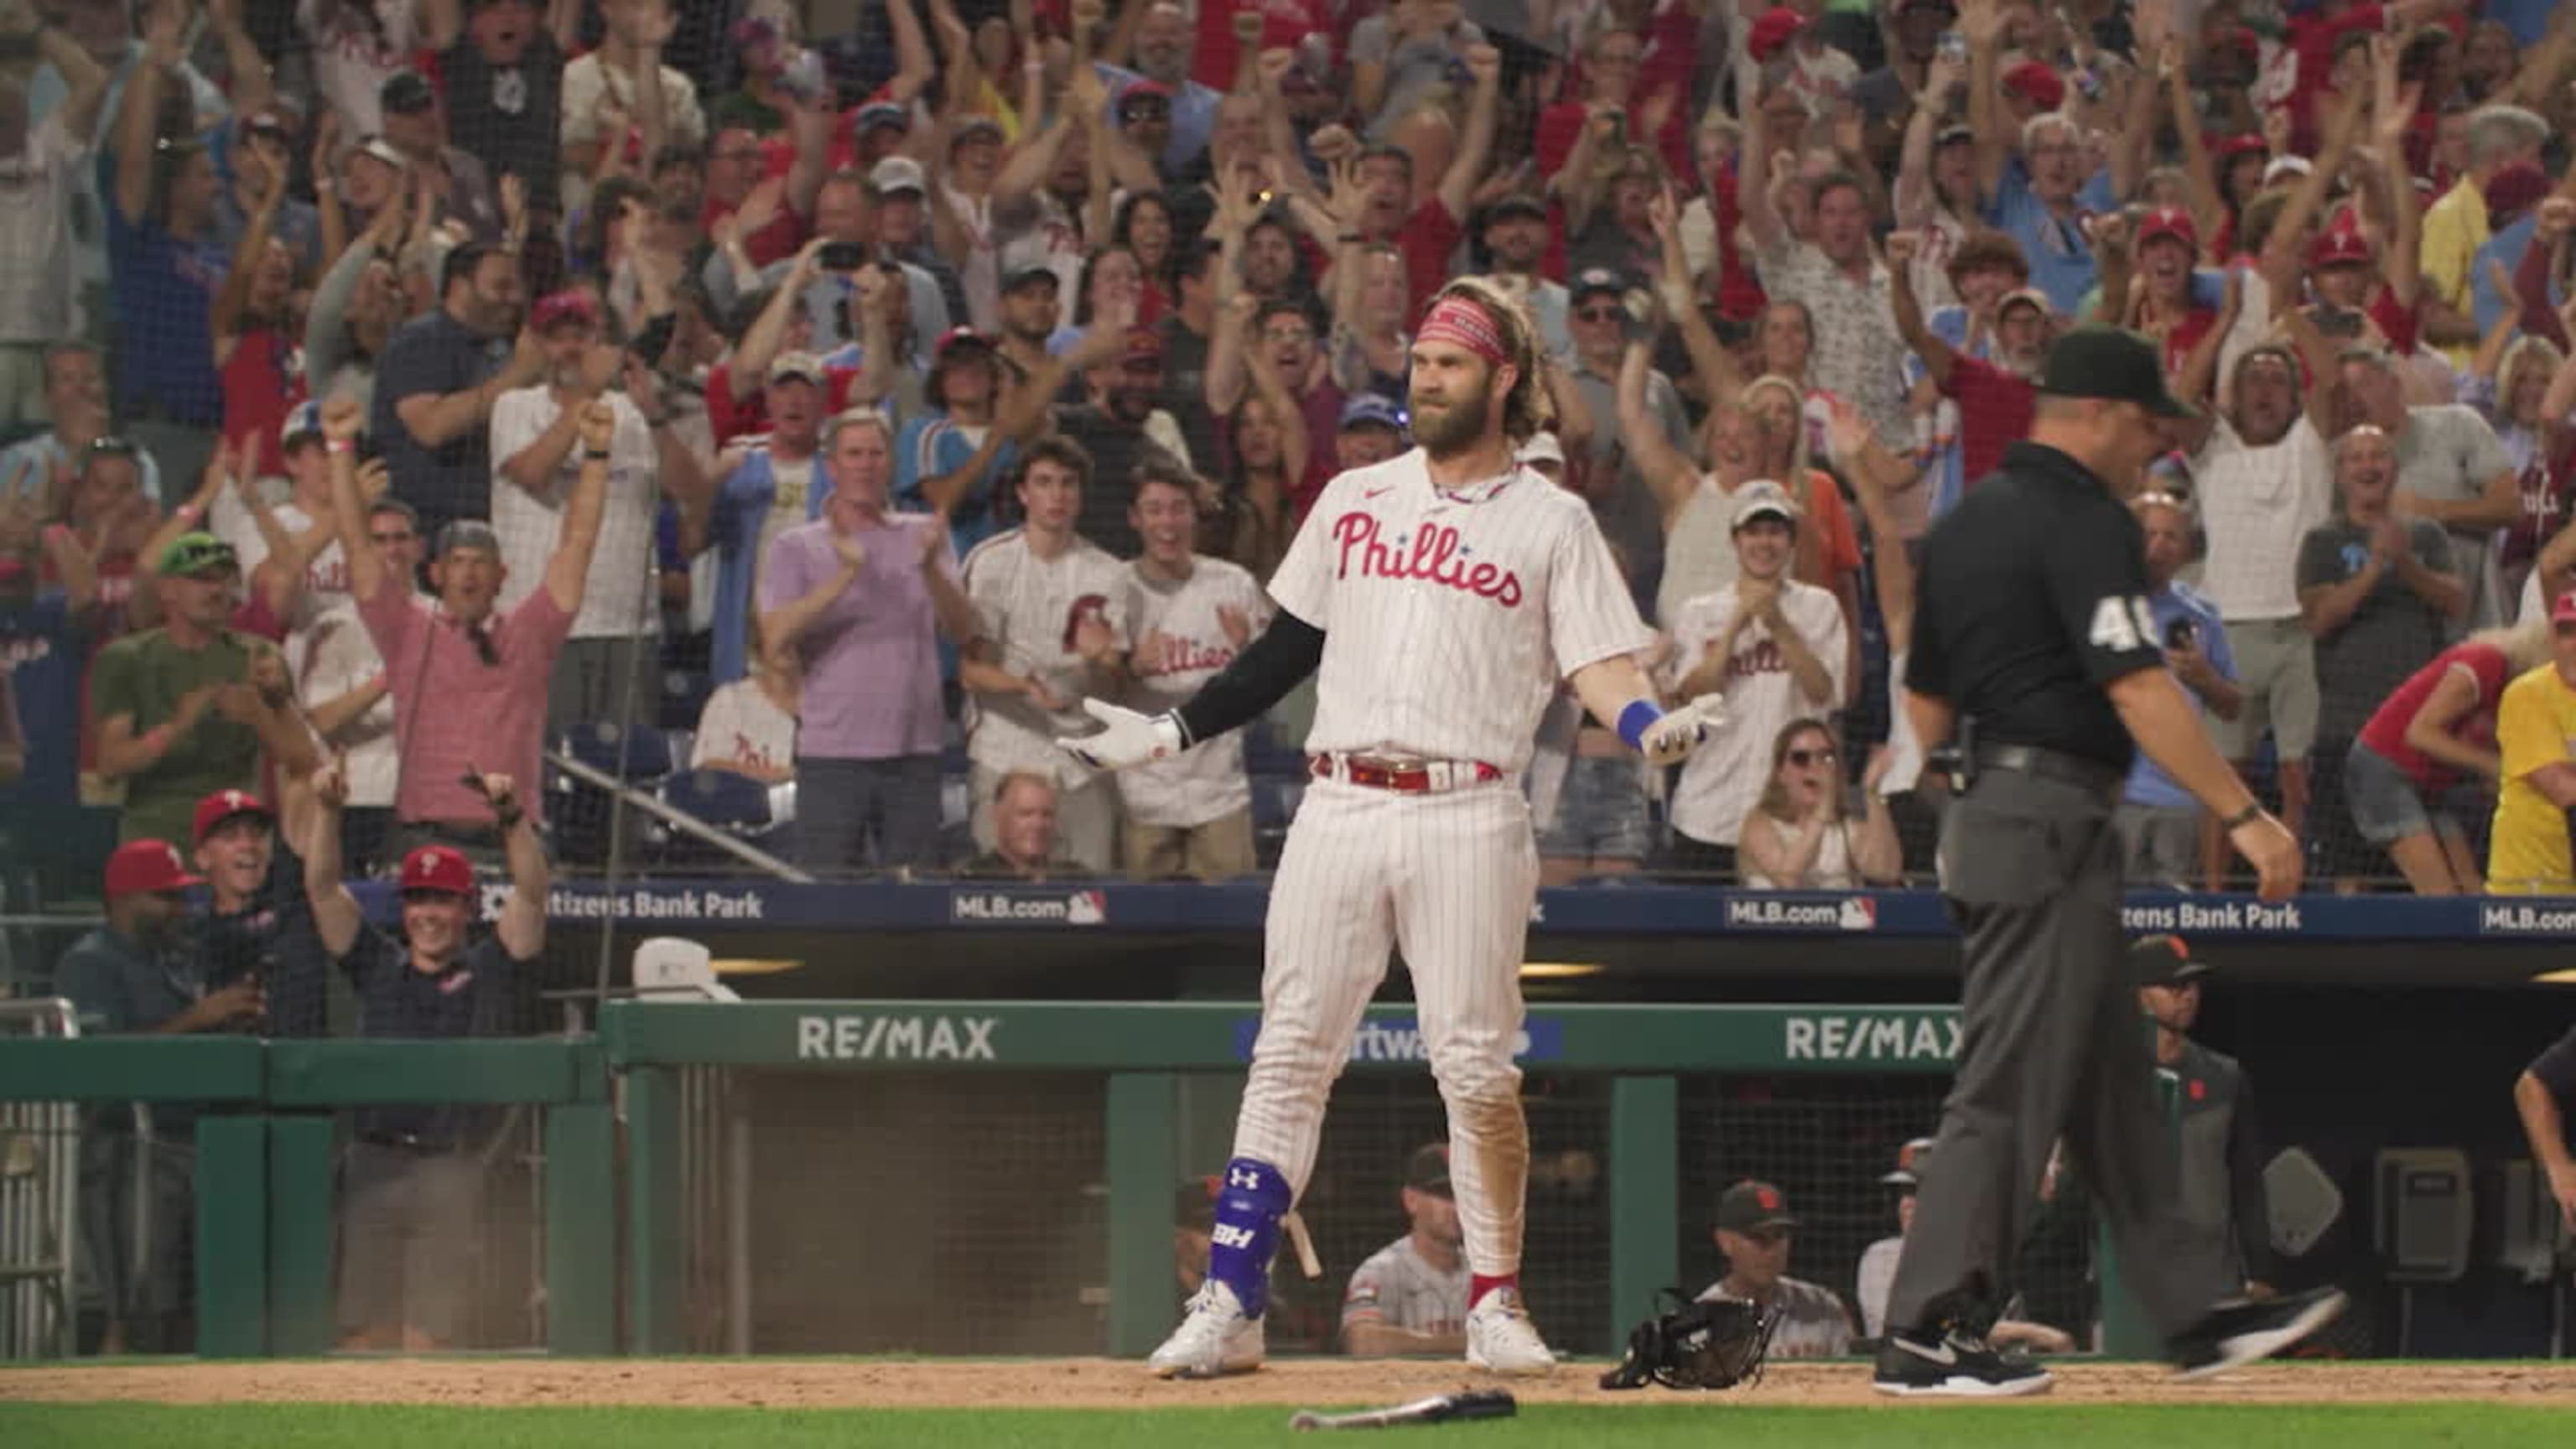 Bryce Harper's World Series homer sets tone for Phillies vs. Astros